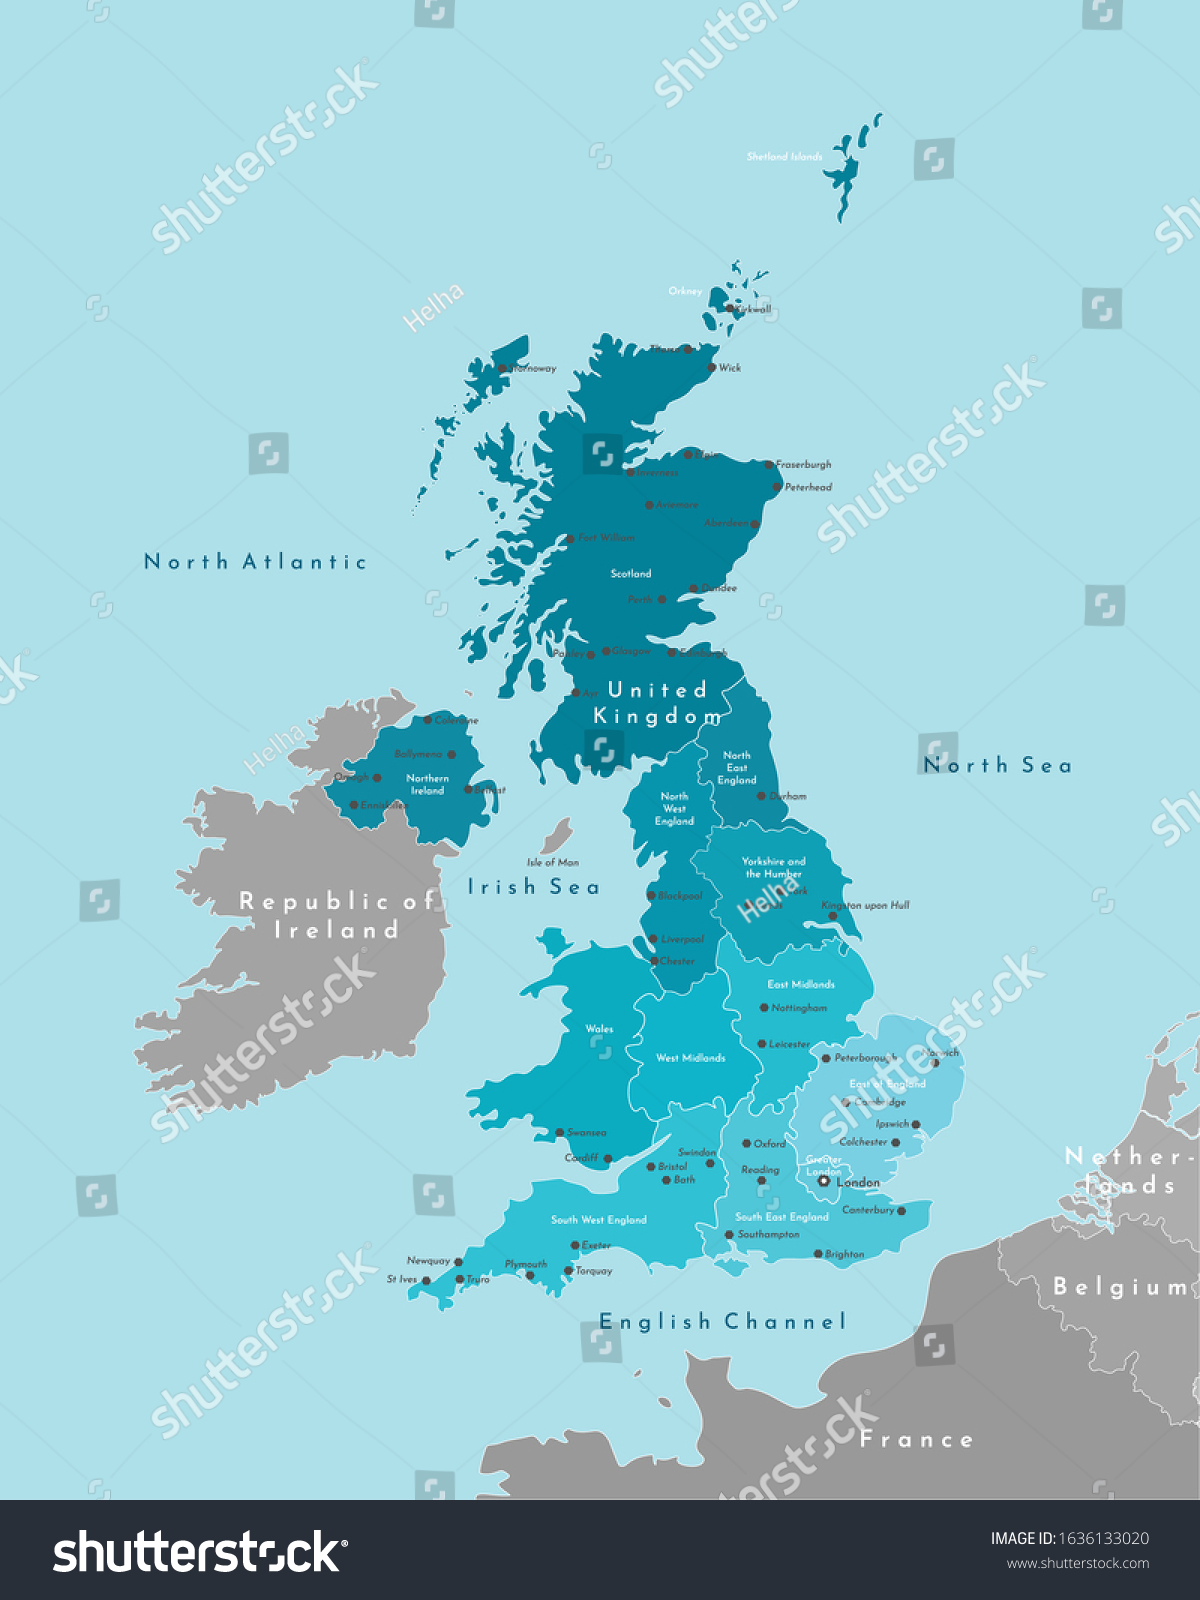 SVG of Vector modern illustration. Simplified geographical  map of United Kingdom of Great Britain and Northern Ireland (UK). Blue background of Irish sea, North Sea, North Atlantic. Names of cities, regions svg